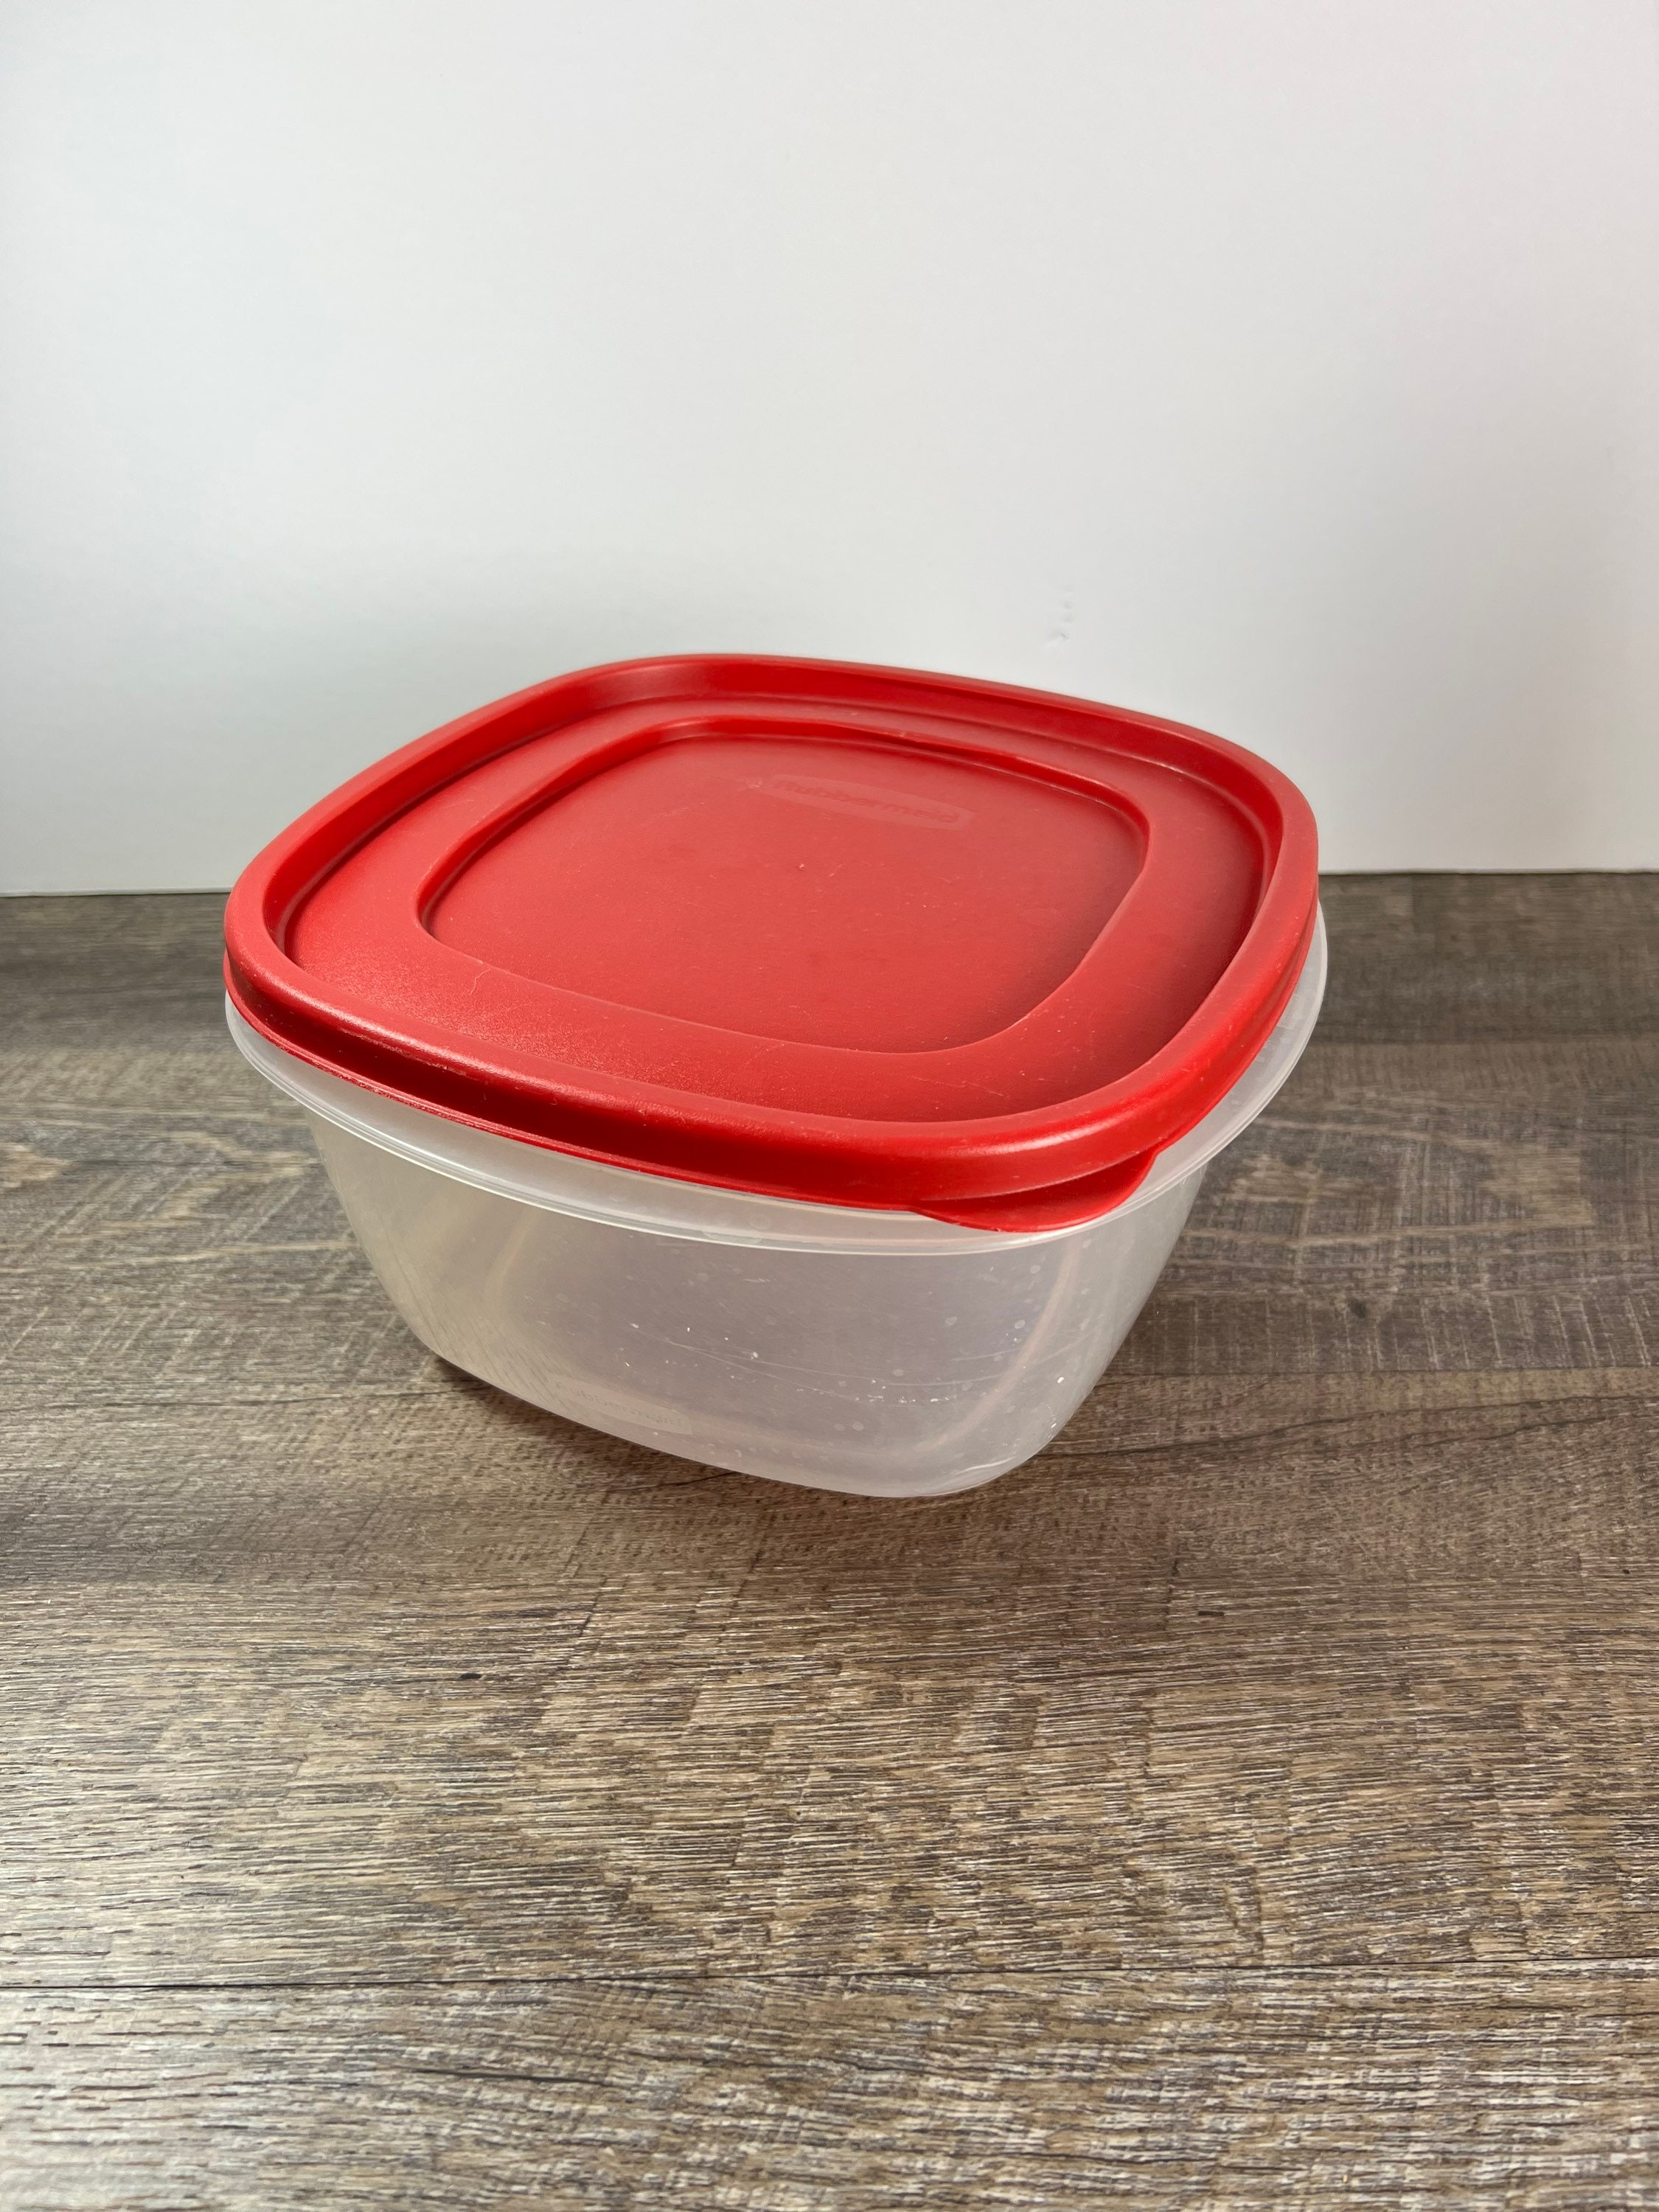 Rubbermaid 7J58 Red Plastic 4 Snap On Replacement Lid